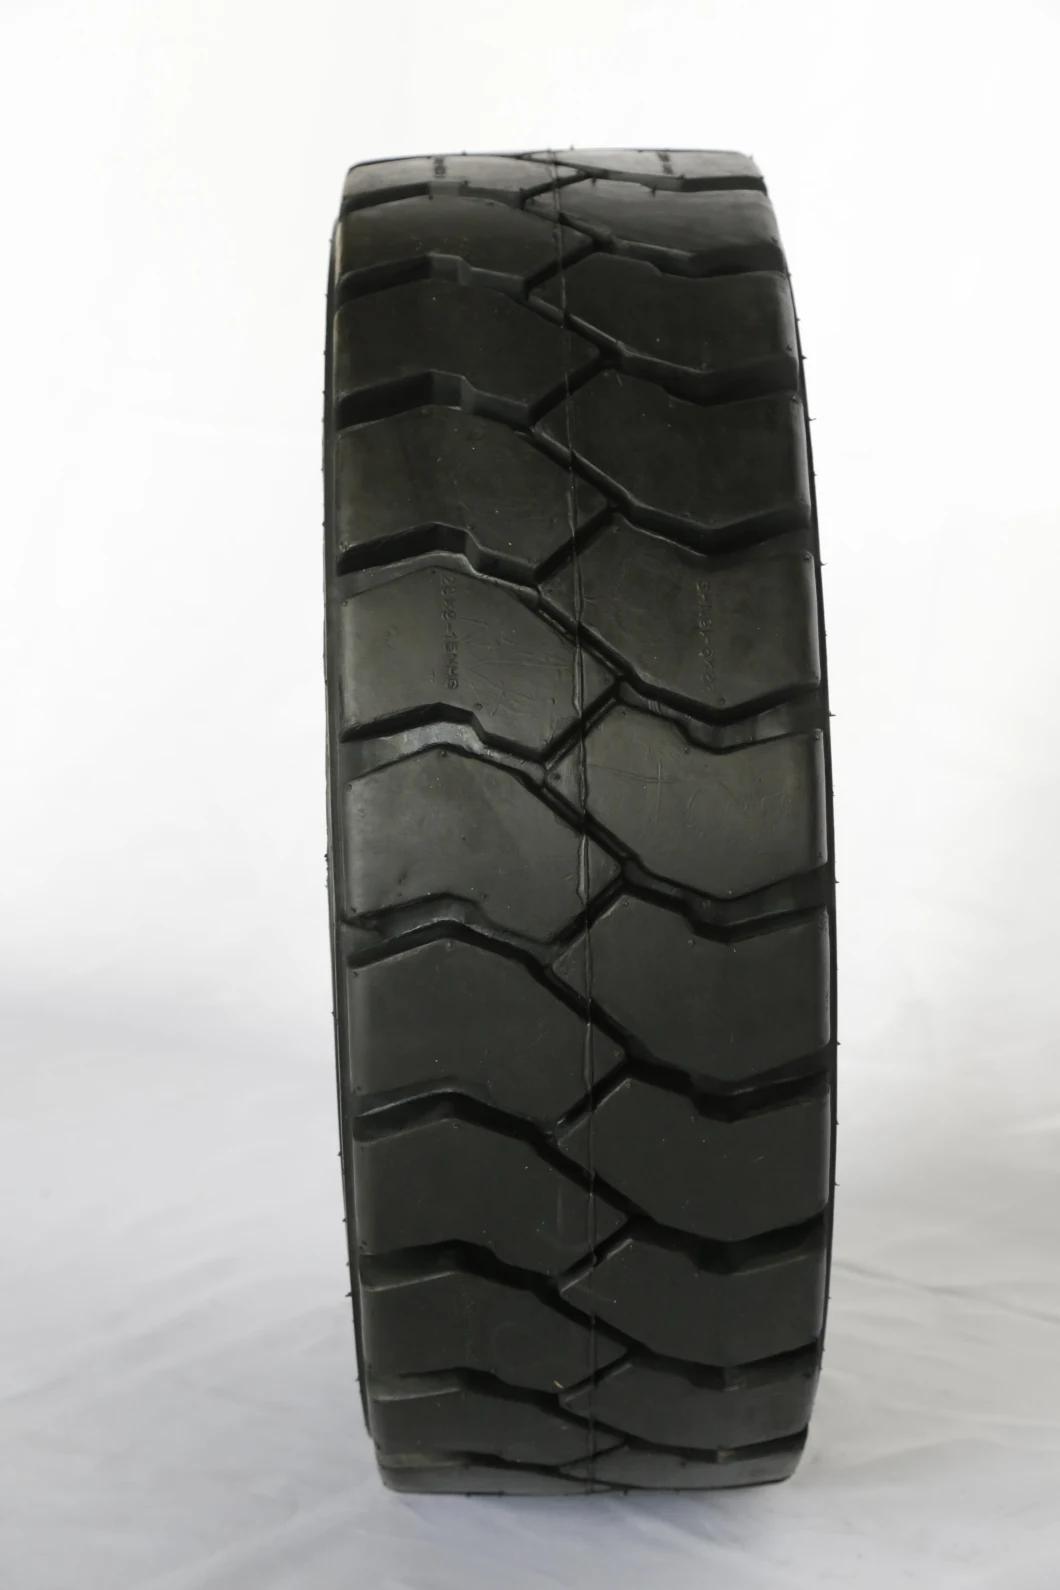 Forklift Tire Factory Cheap Price Bias Tires, Forklift Tyre/Tire 7.00-9, 700-9